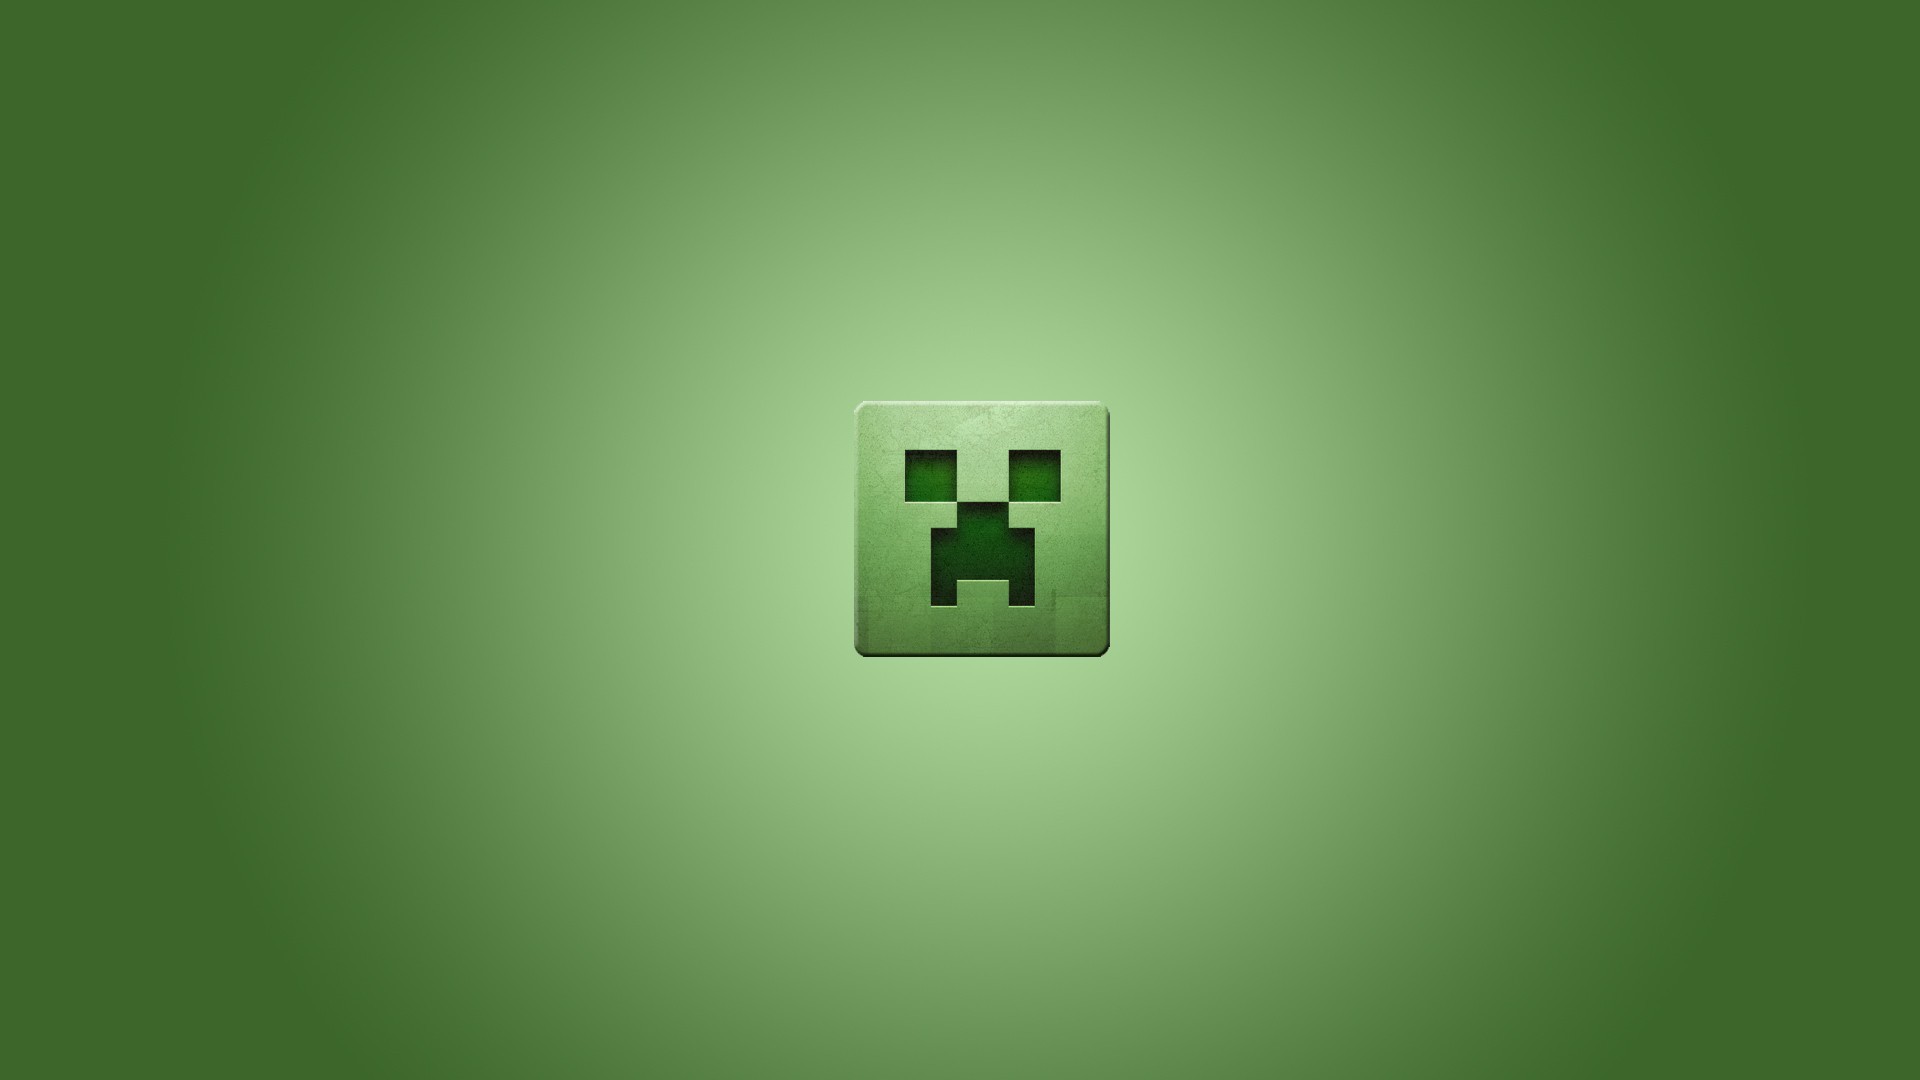 1920x1080 Video games minimalistic creeper Minecraft simplistic simple background  green background wallpaper |  | 223433 | WallpaperUP